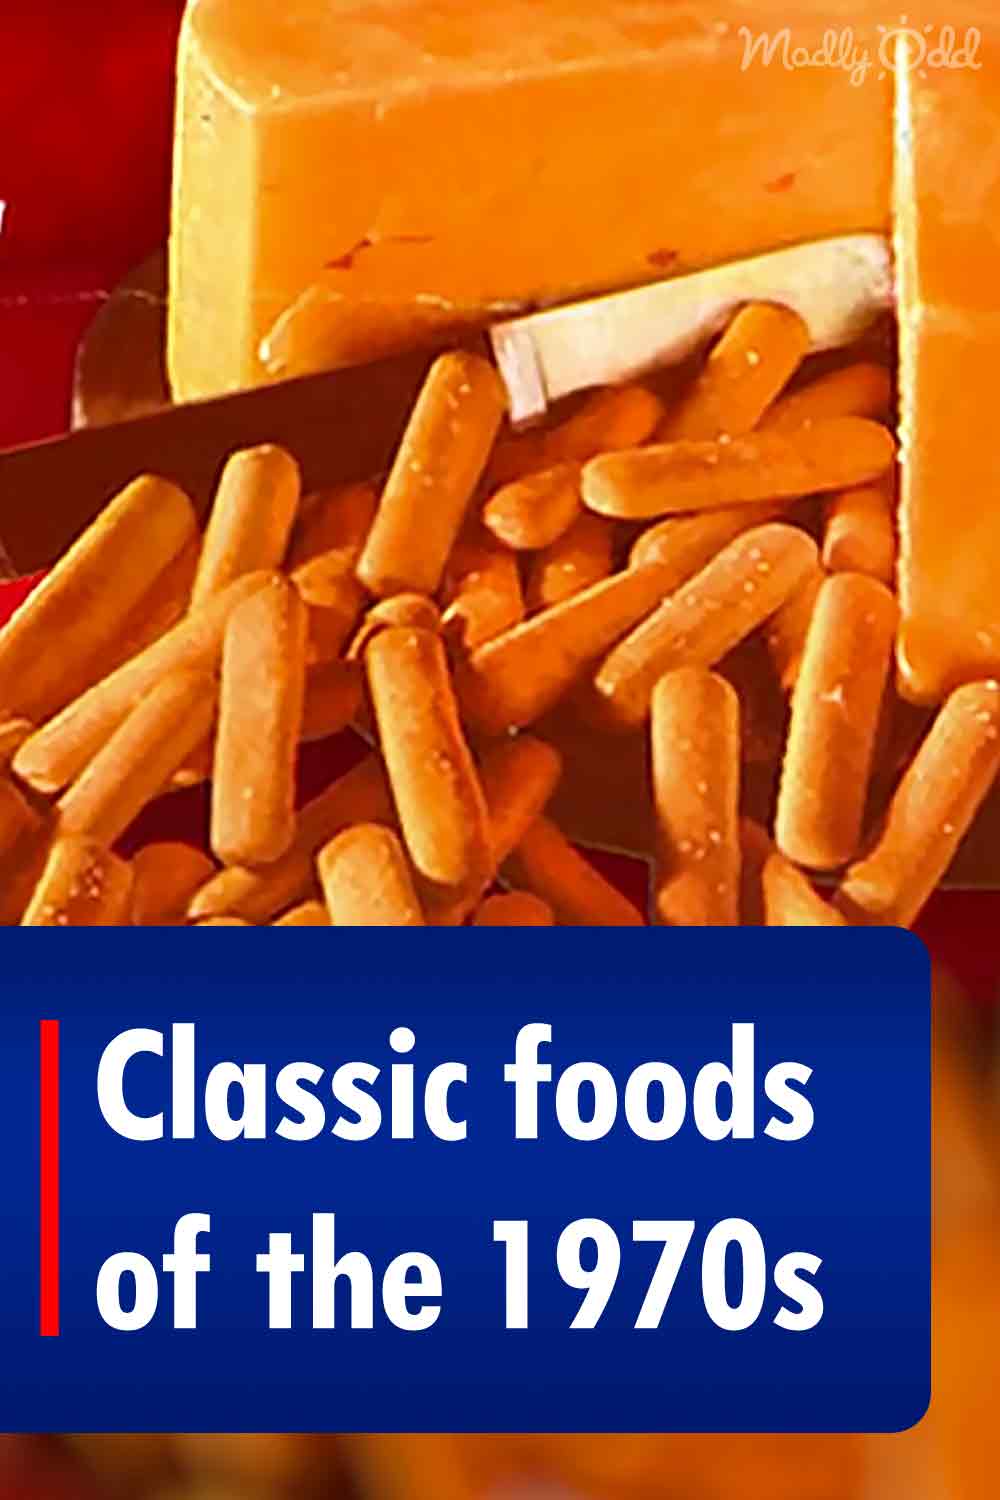 Classic foods of the 1970s